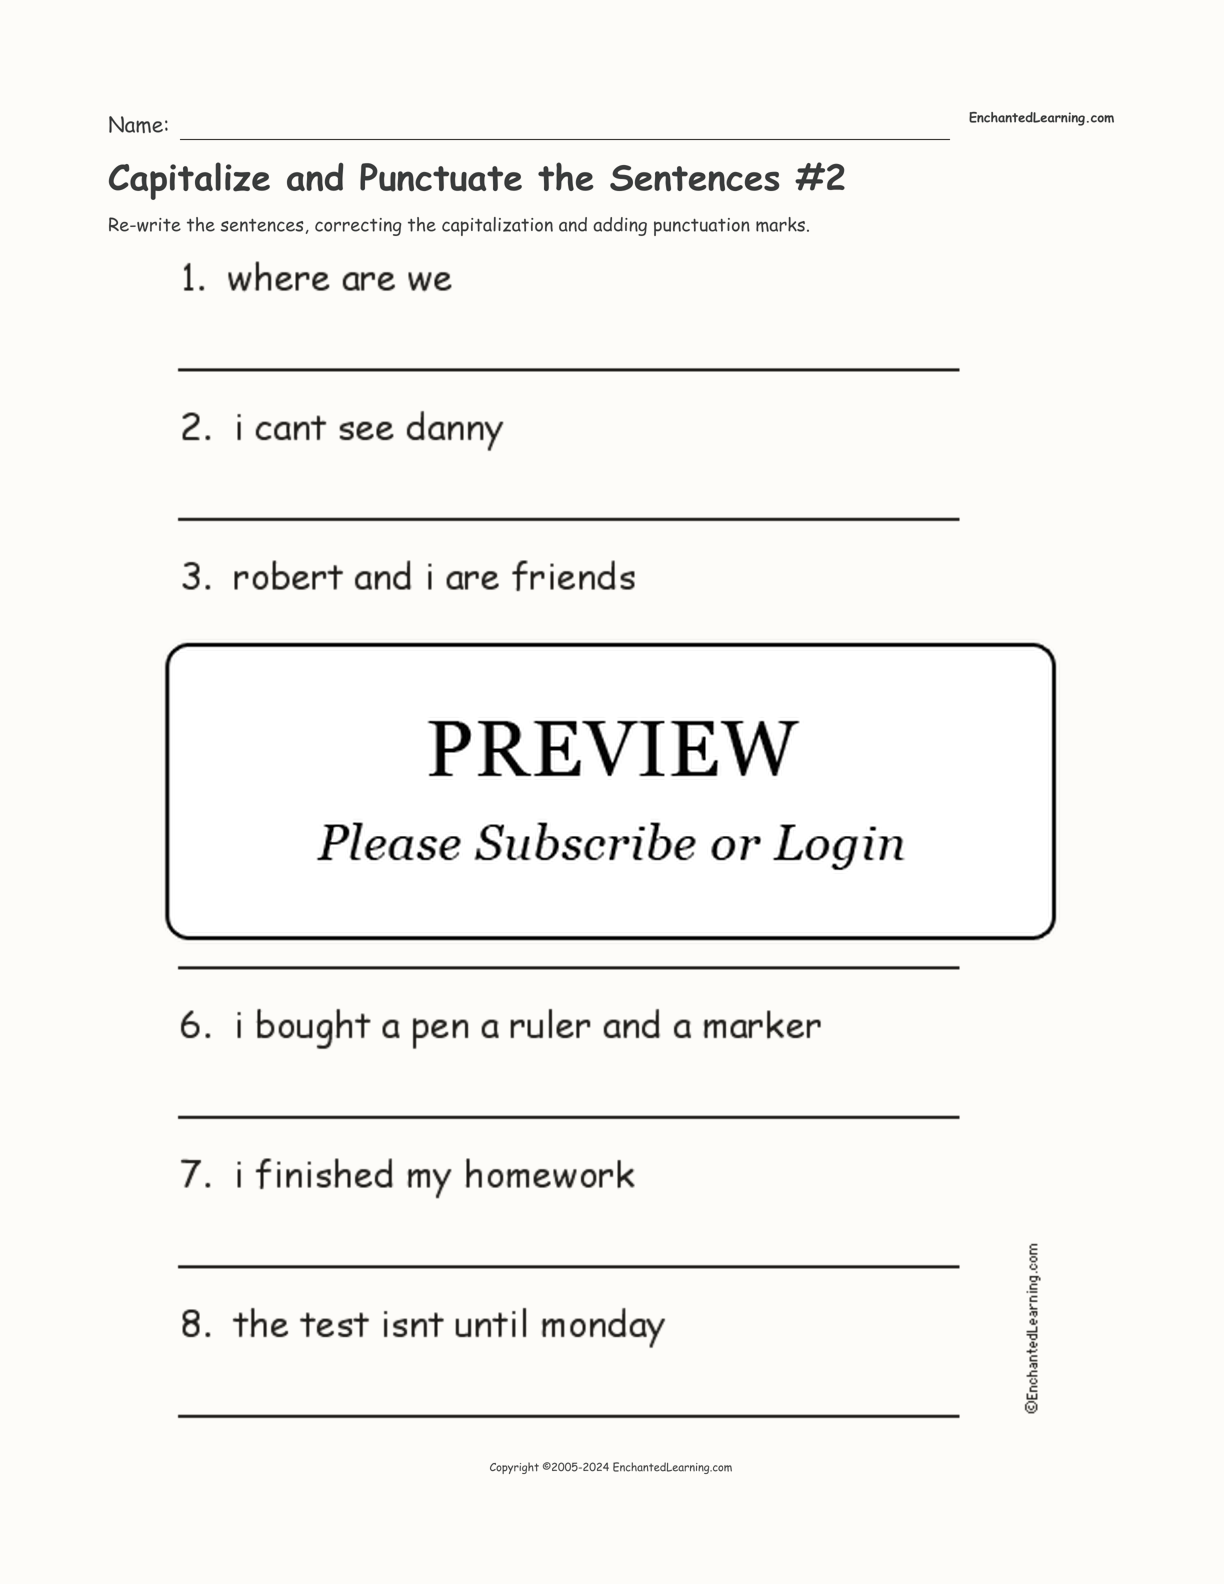 Capitalize and Punctuate the Sentences #2 interactive worksheet page 1